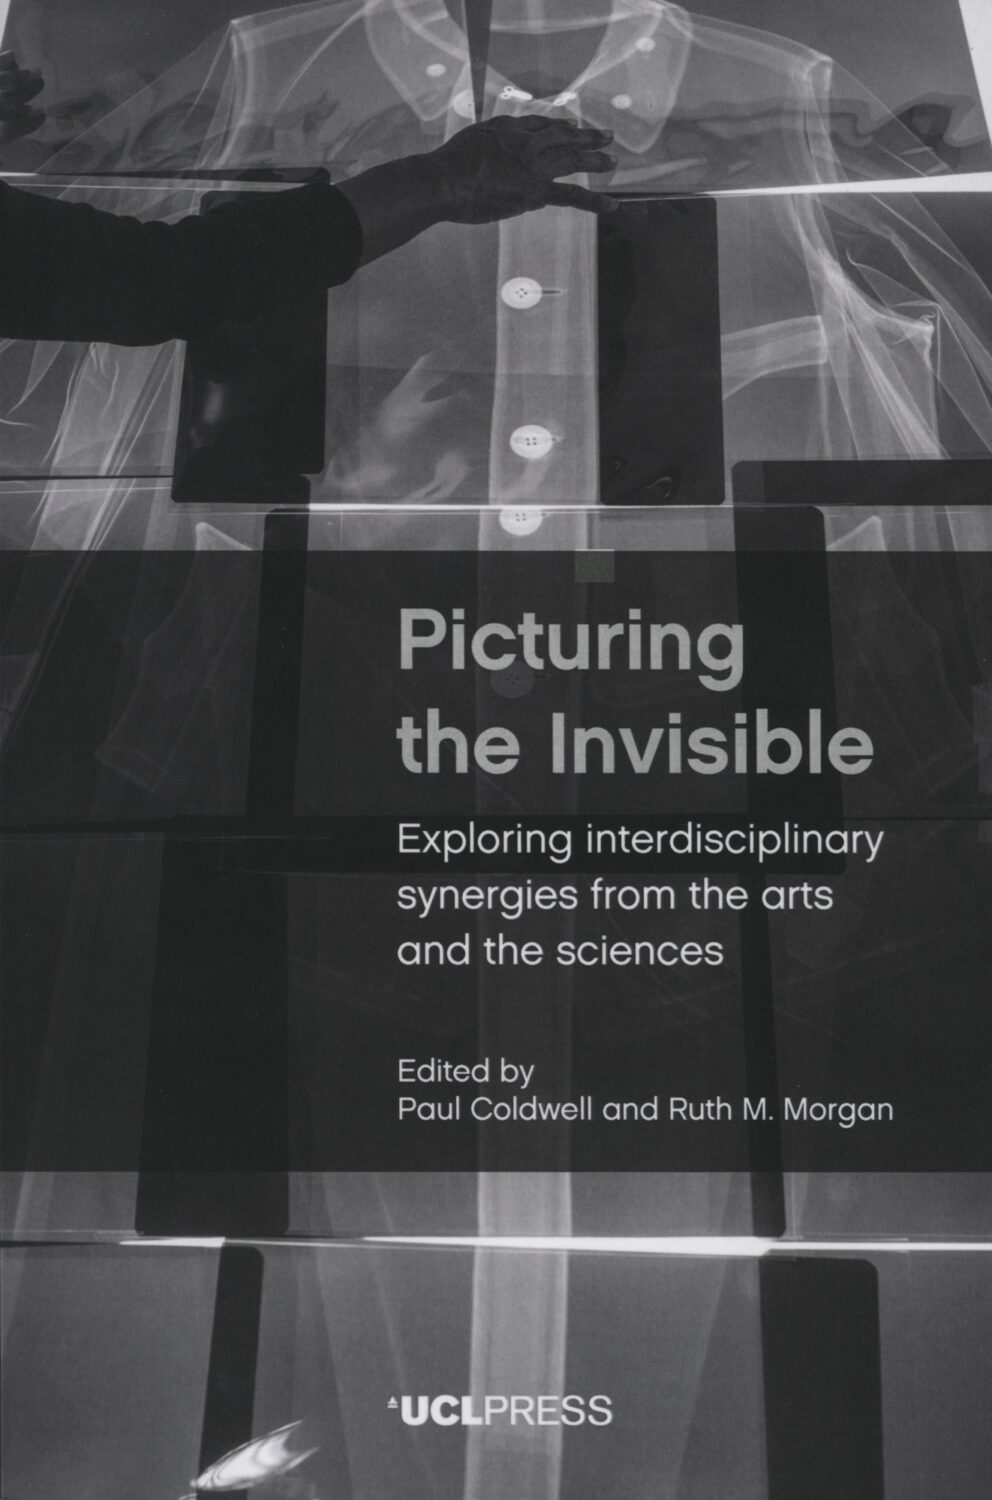 Picturing the Invisible – Exploring interdisciplinary synergies from the arts and the sciences